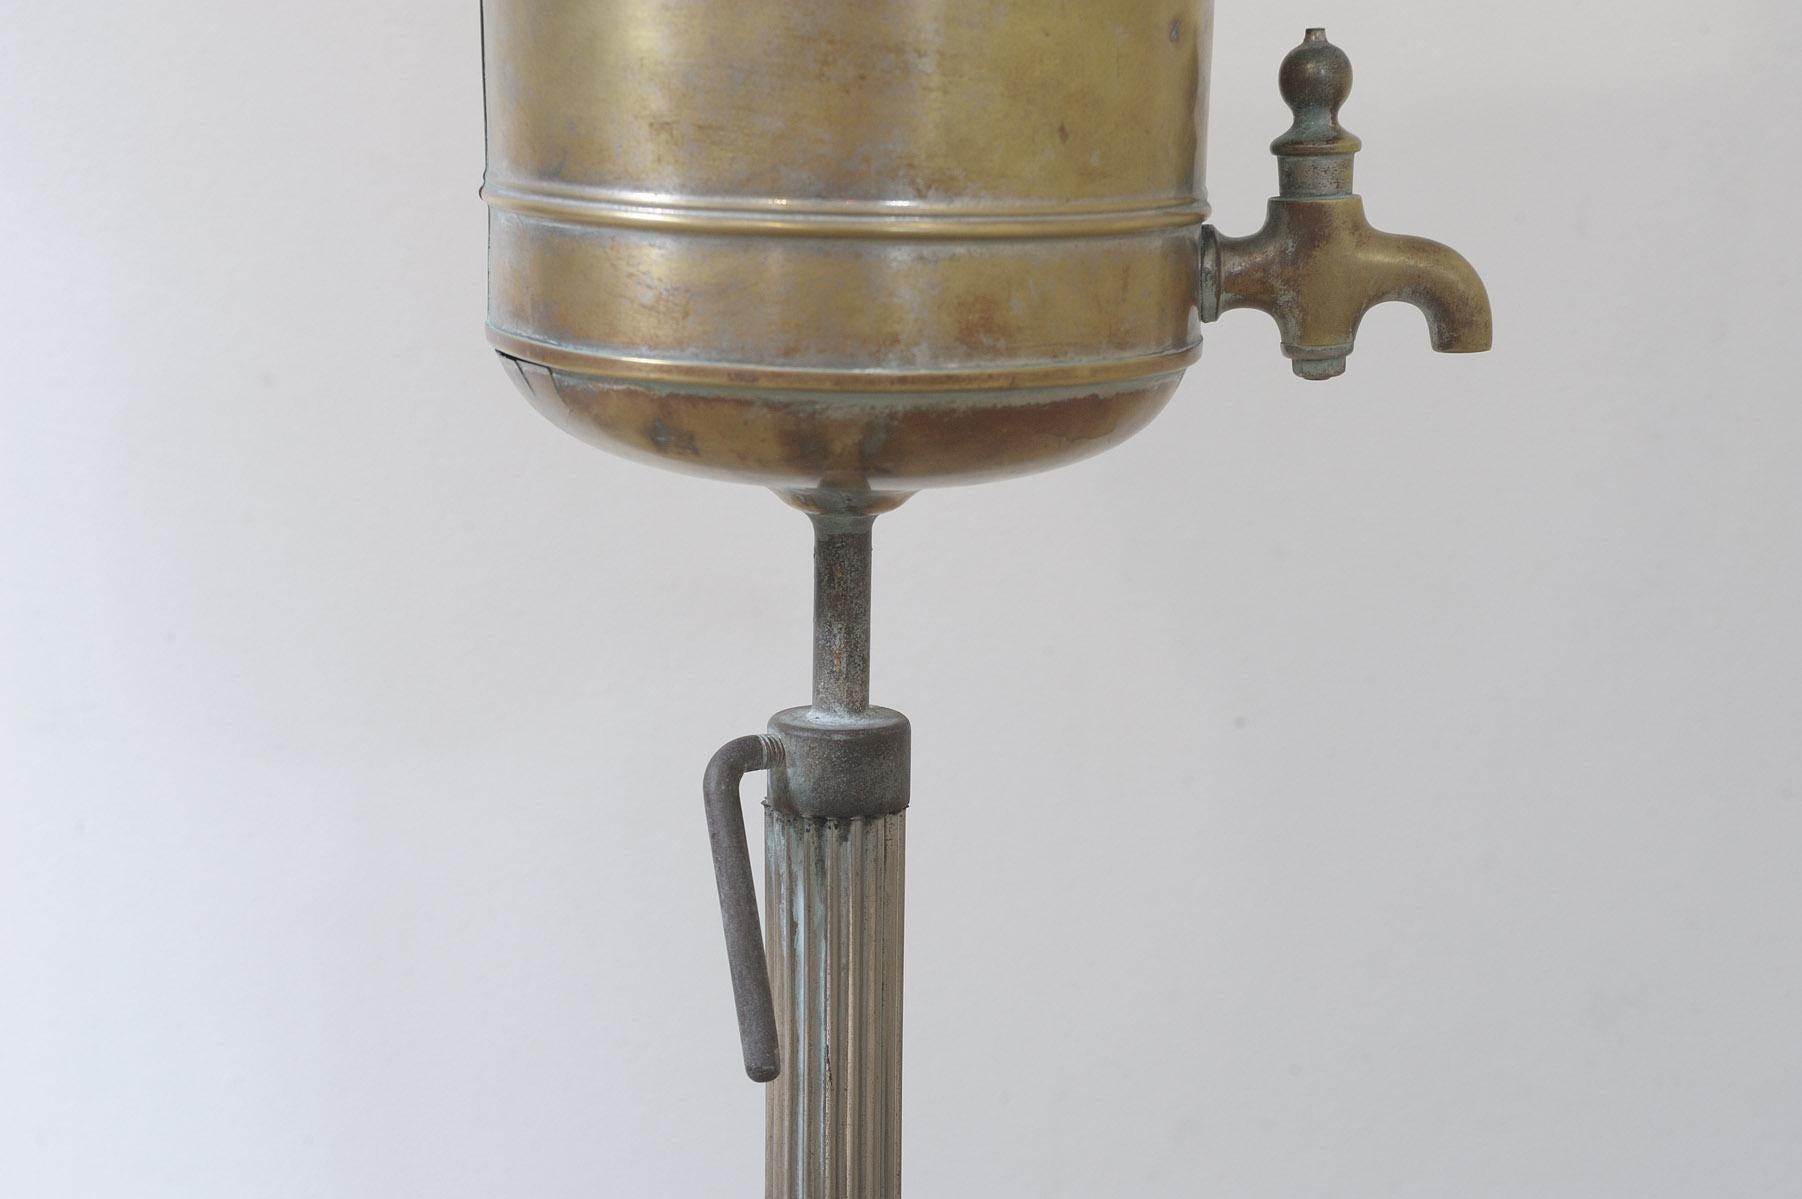  Early 20th century hairdresser wash basin, Austria Hungary For Sale 1